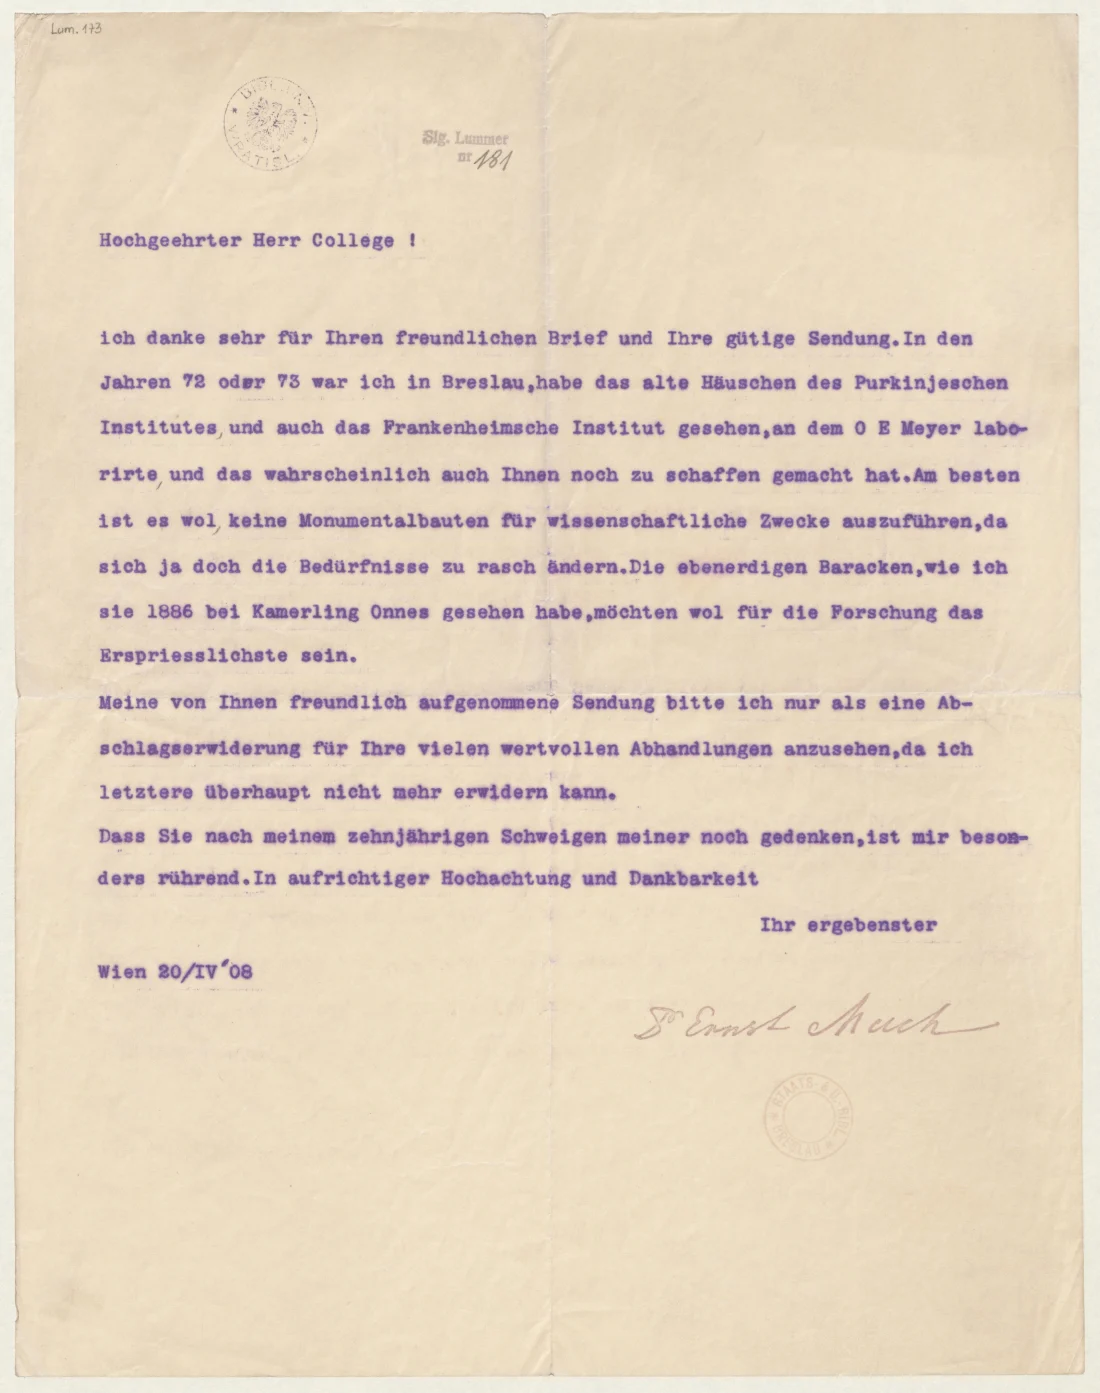 scan of a typed letter